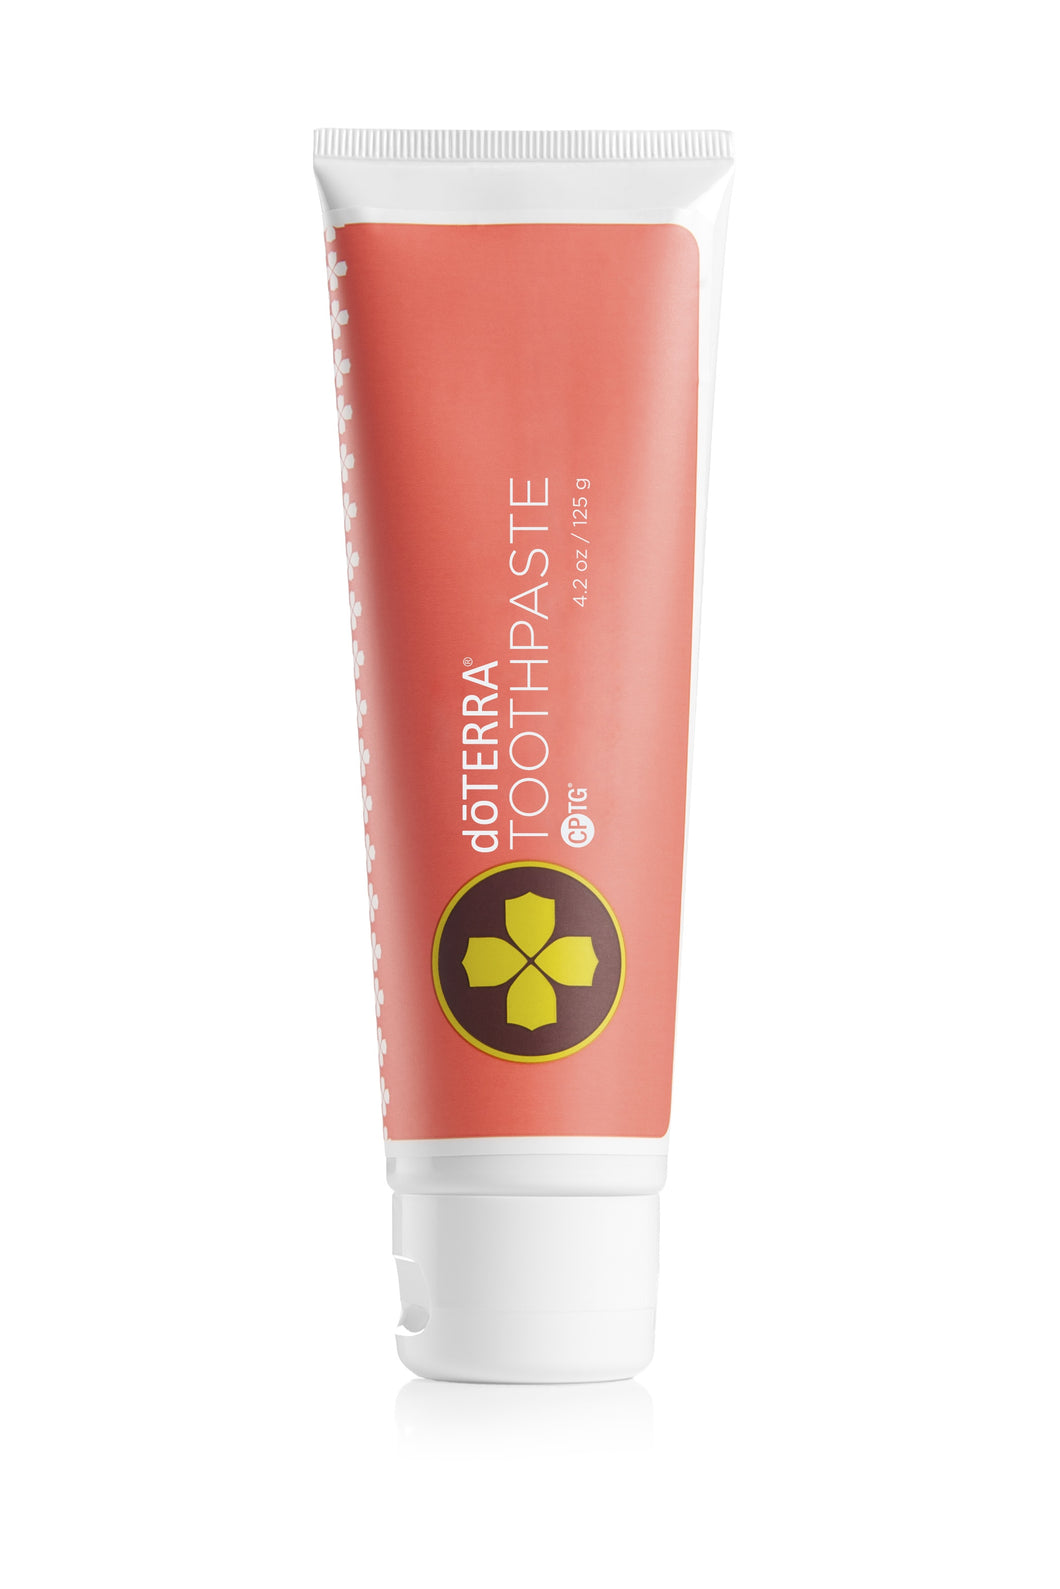 doTERRA On Guard Cleansing Toothpaste 125g